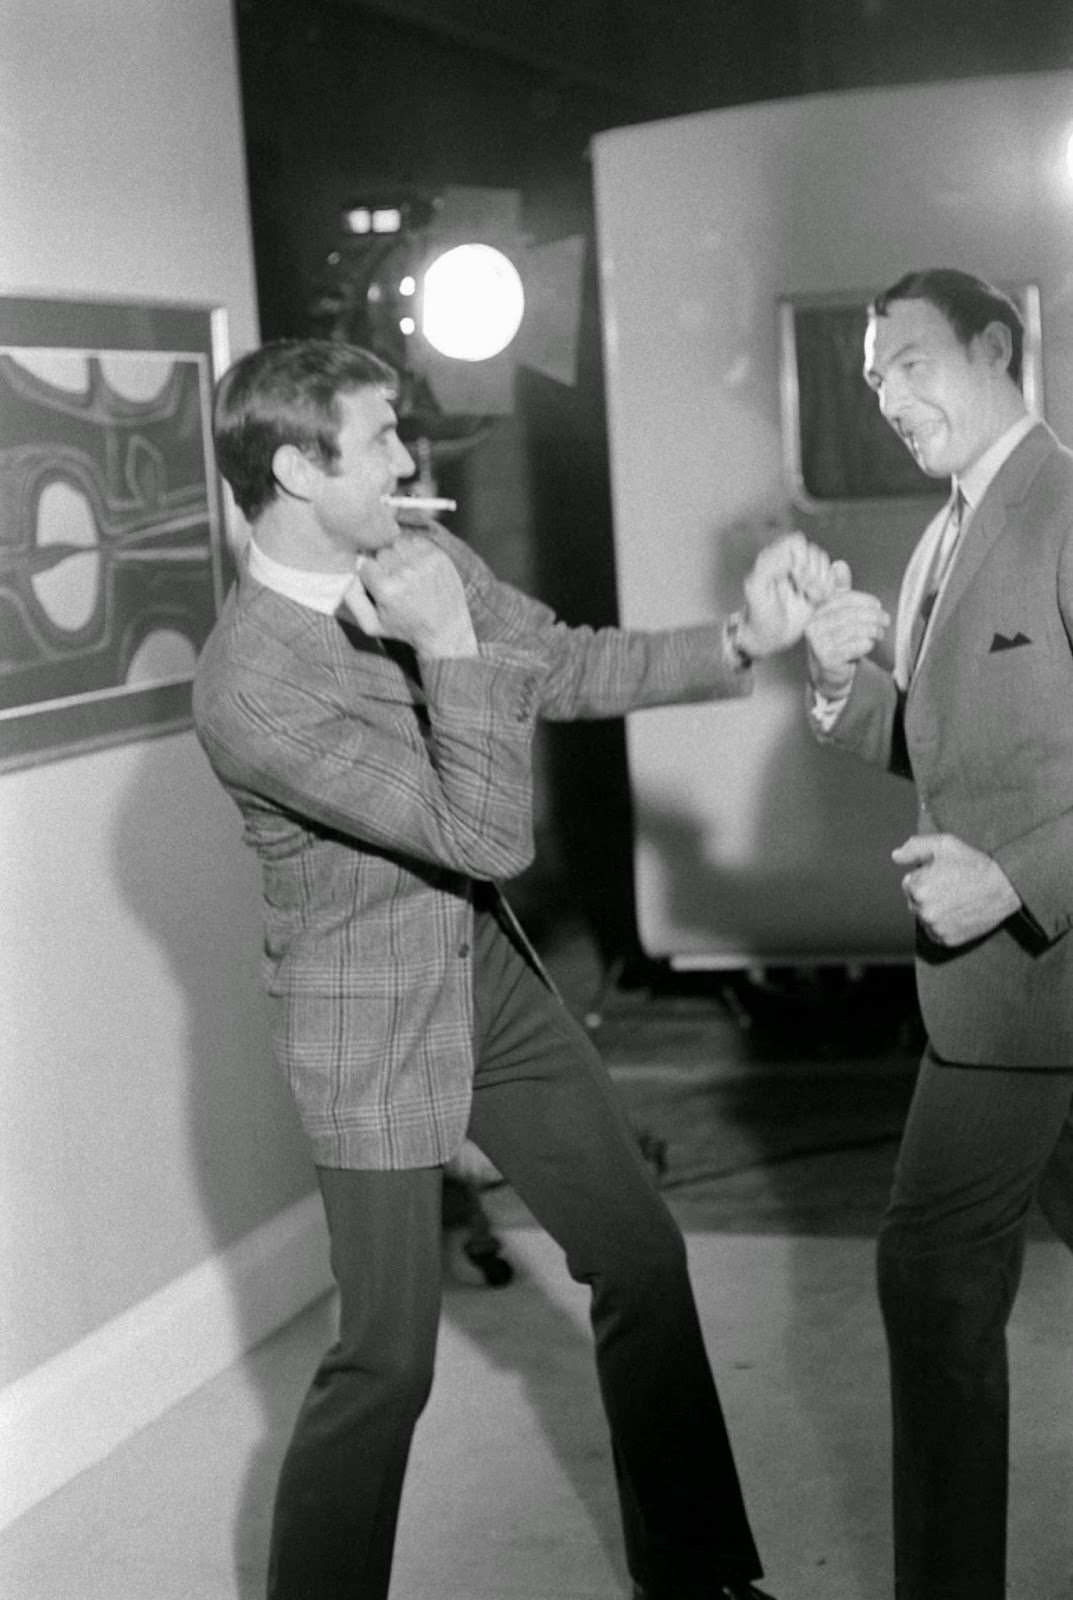 George Lazenby goofs off behind the scenes of his screen test, boxing with an unidentified man, 1967.